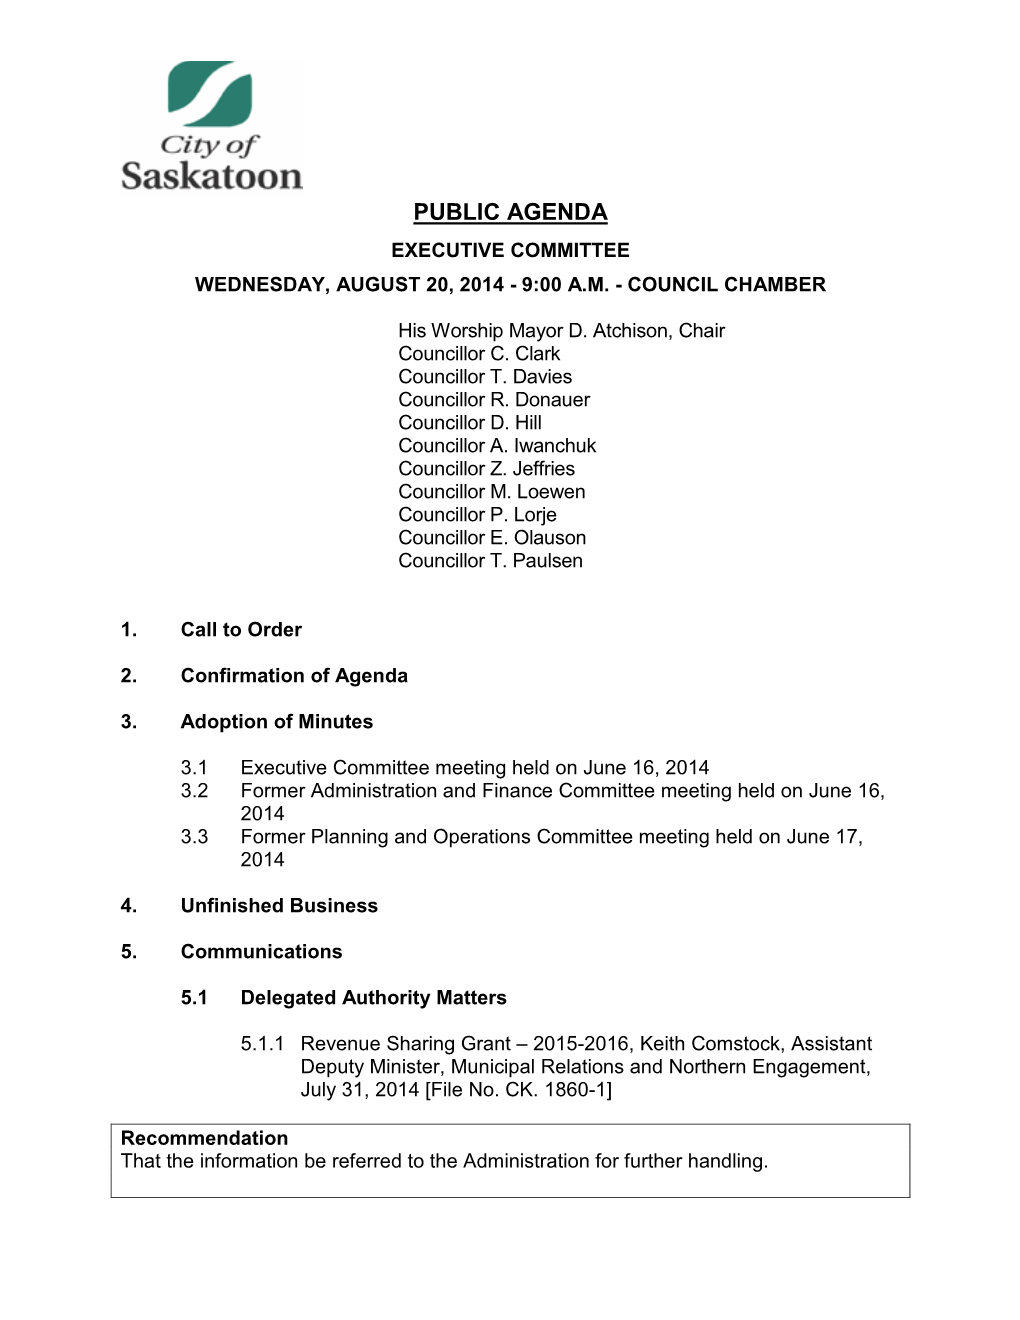 Public Agenda Executive Committee Wednesday, August 20, 2014 - 9:00 A.M